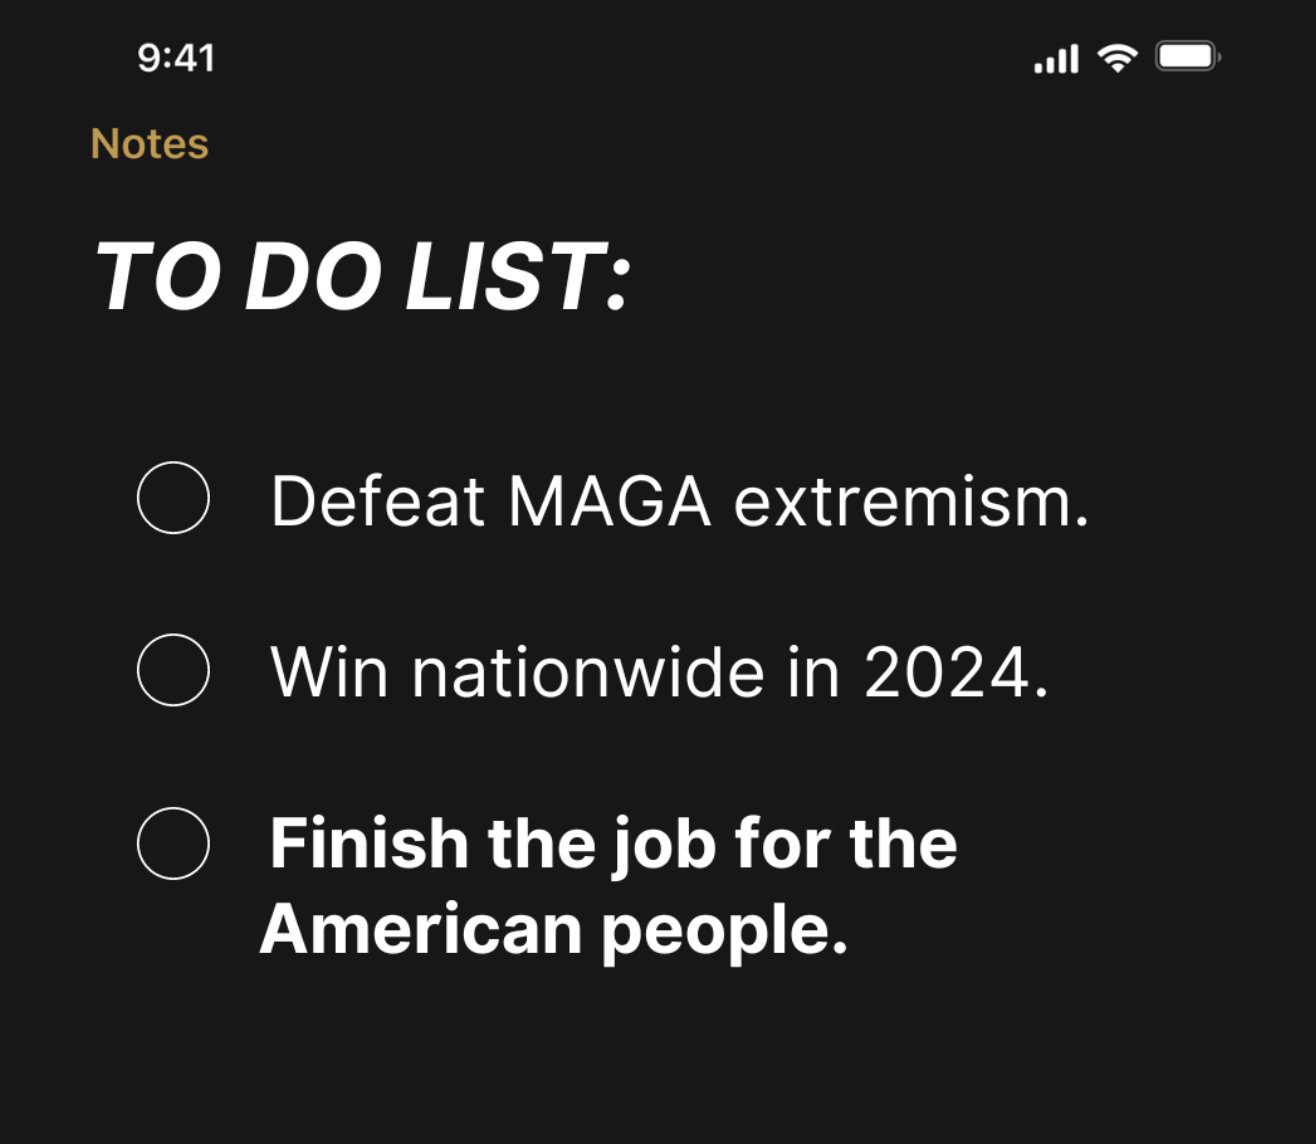 TO DO LIST: Defeat MAGA extremism, Win nationwide in 2024, and Finish the job for the American people